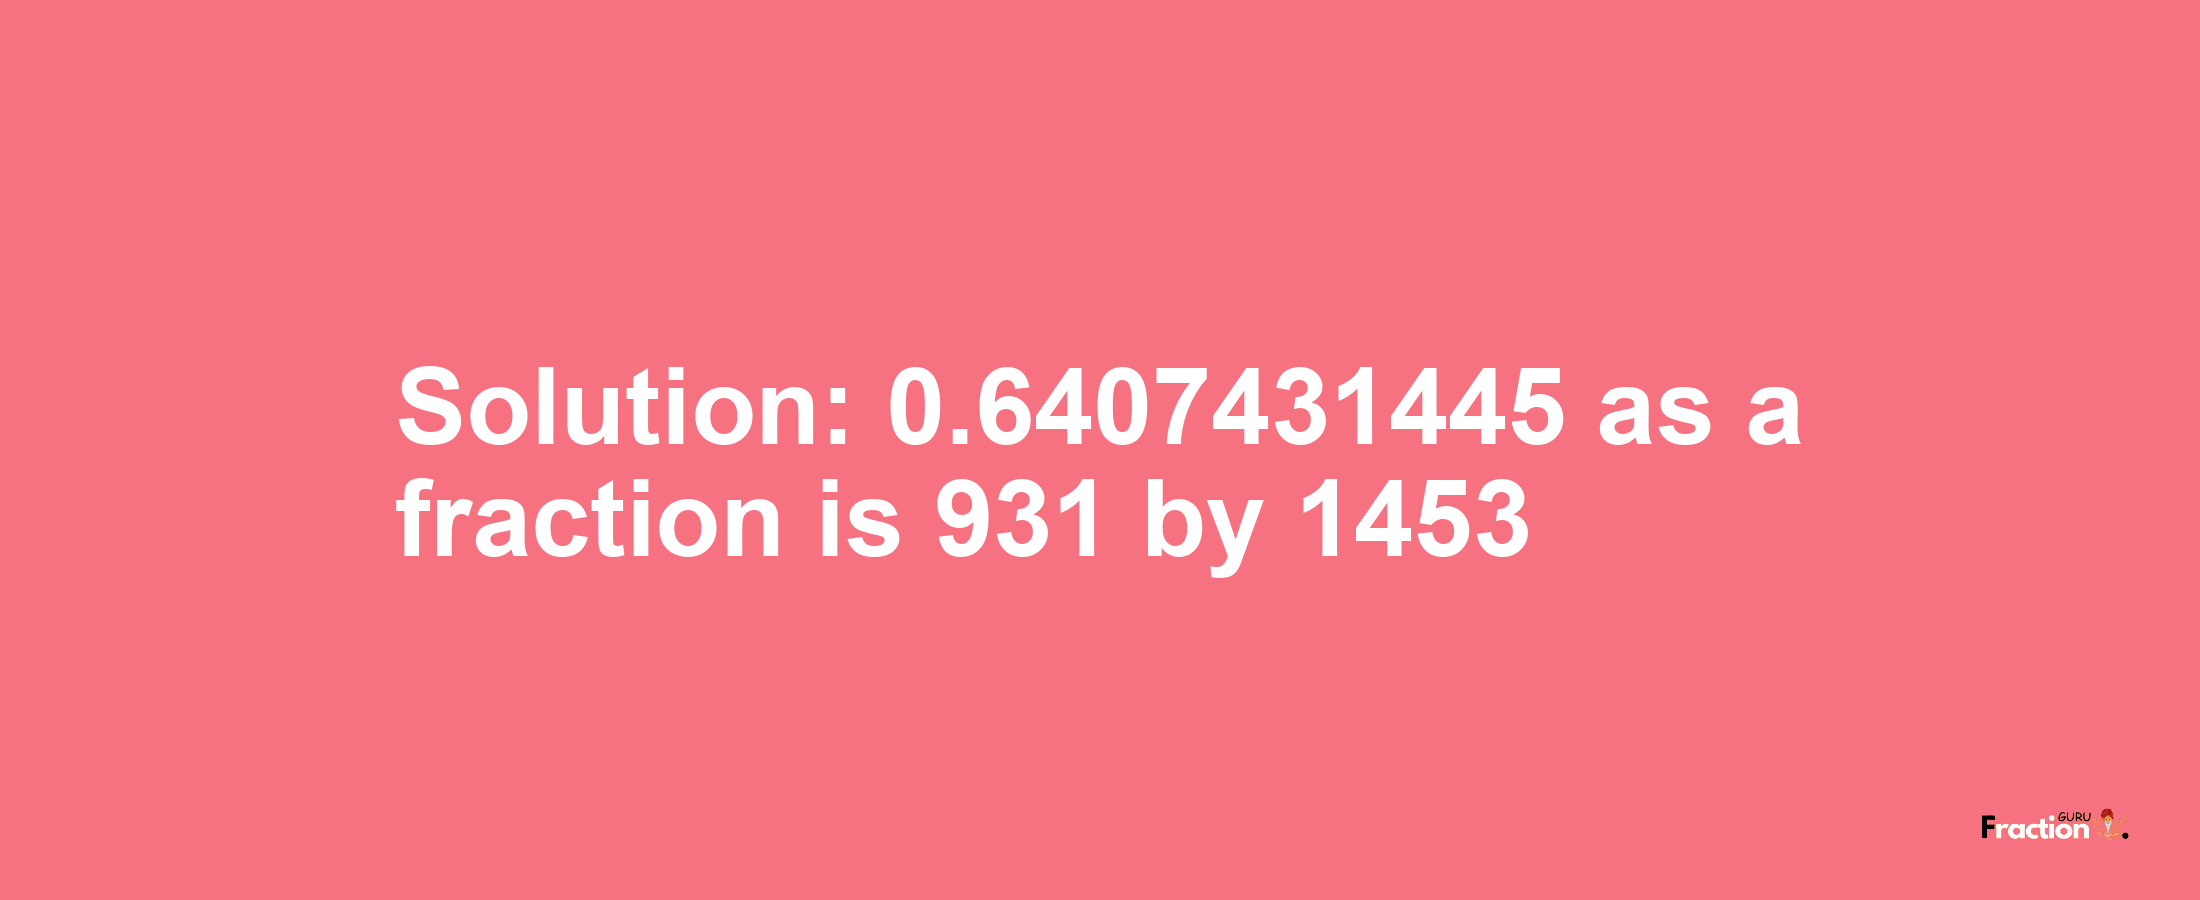 Solution:0.6407431445 as a fraction is 931/1453